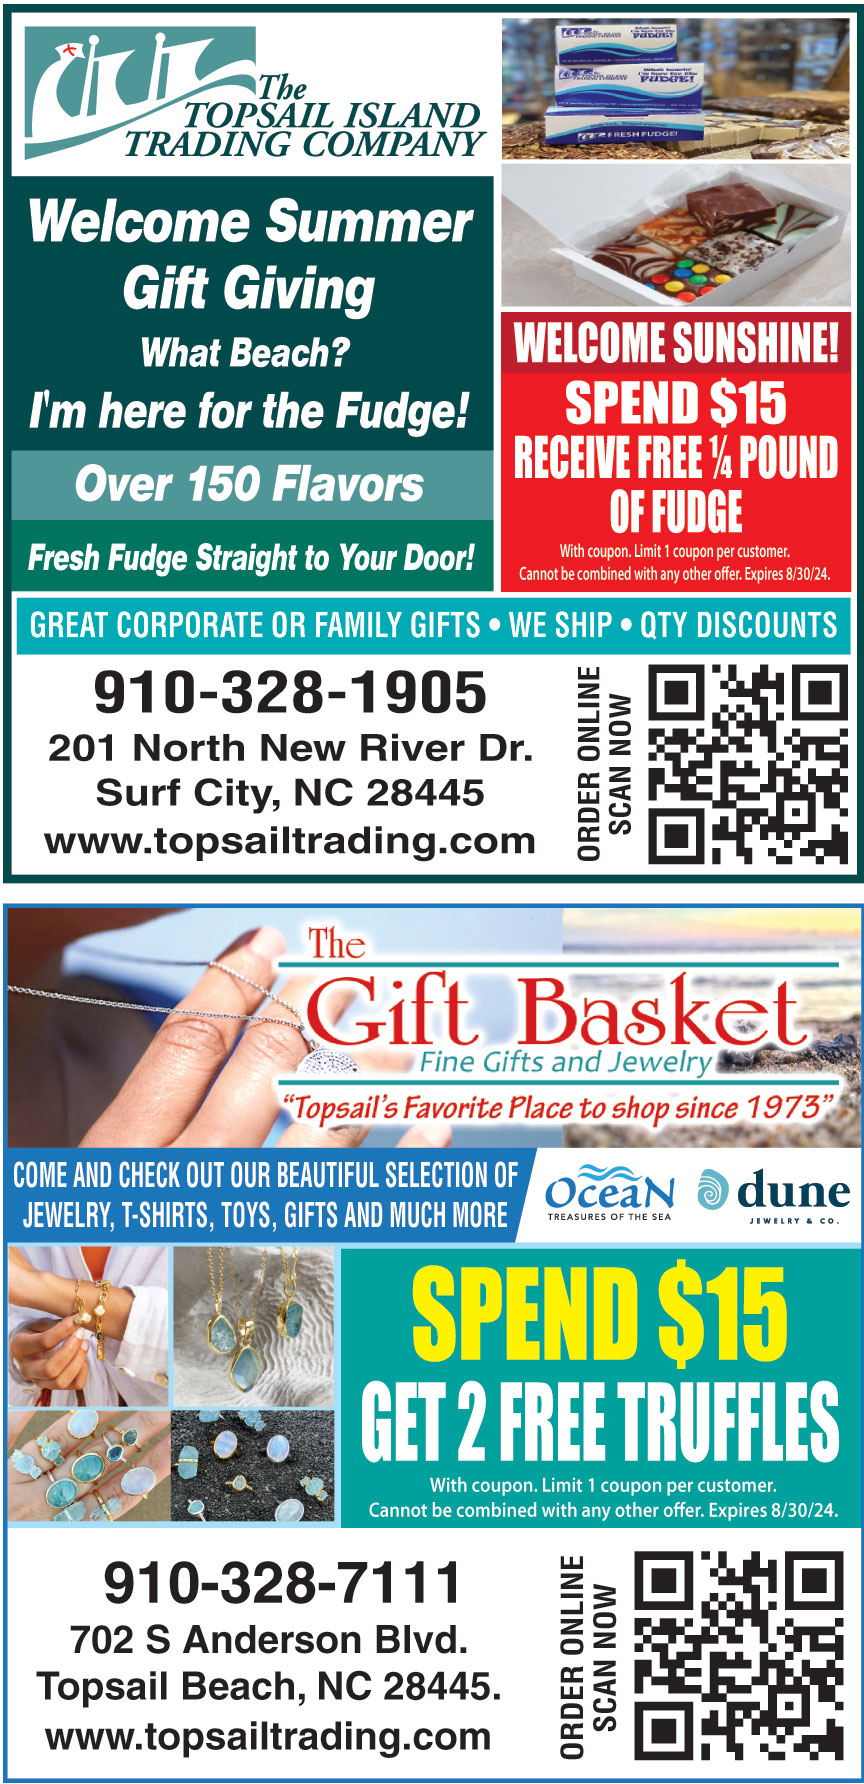 TOPSAIL ISLAND TRADING CO